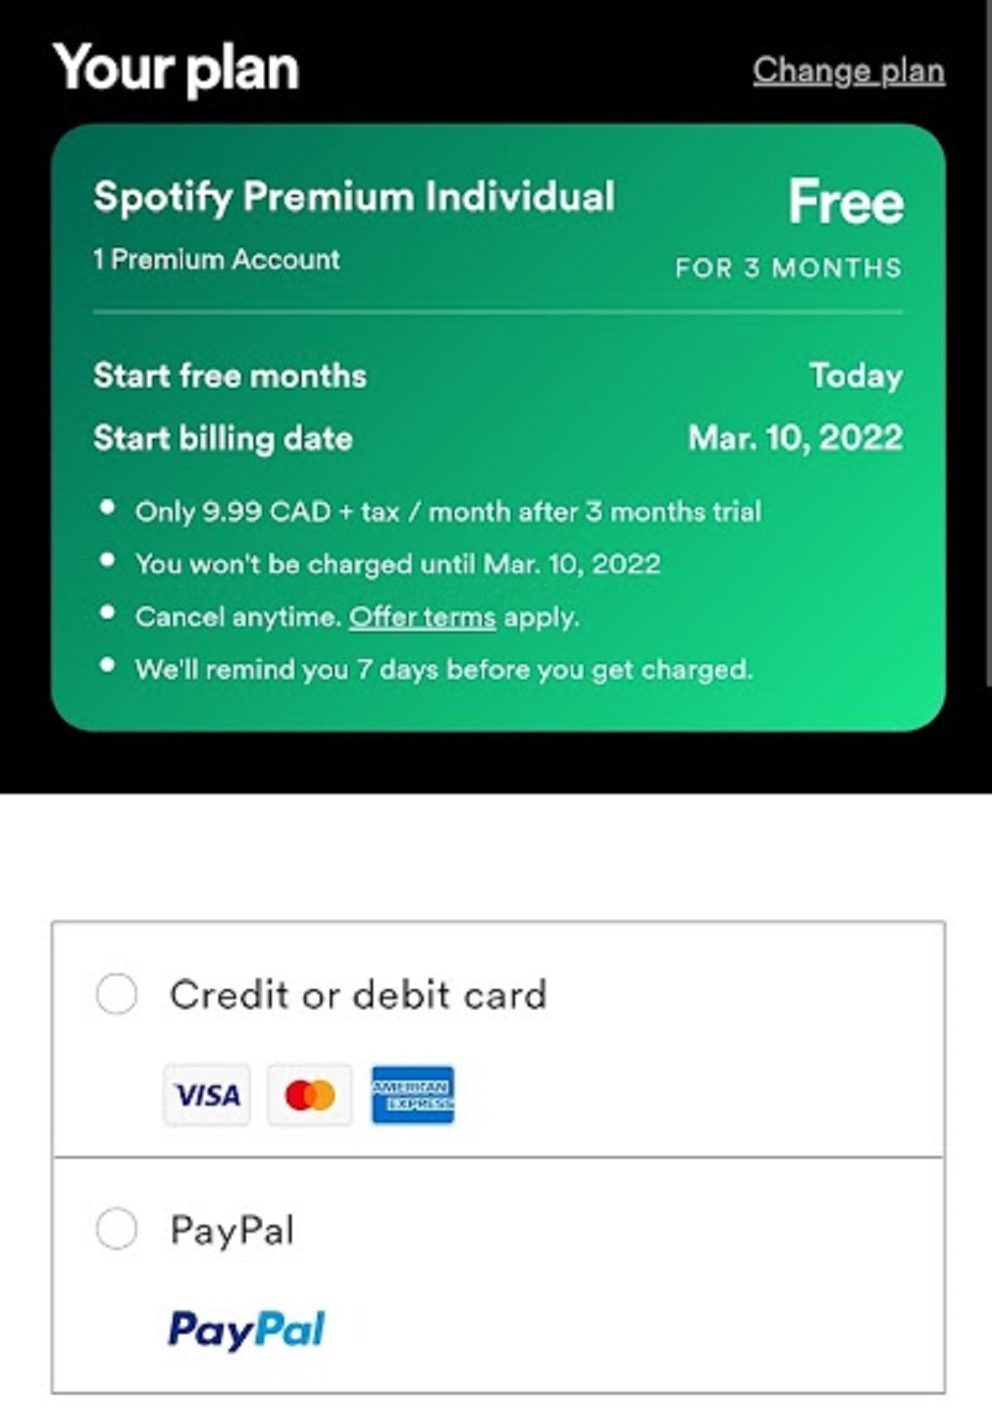 Is Spotify Safe For Credit and Debit Cards? - Tech Anoa